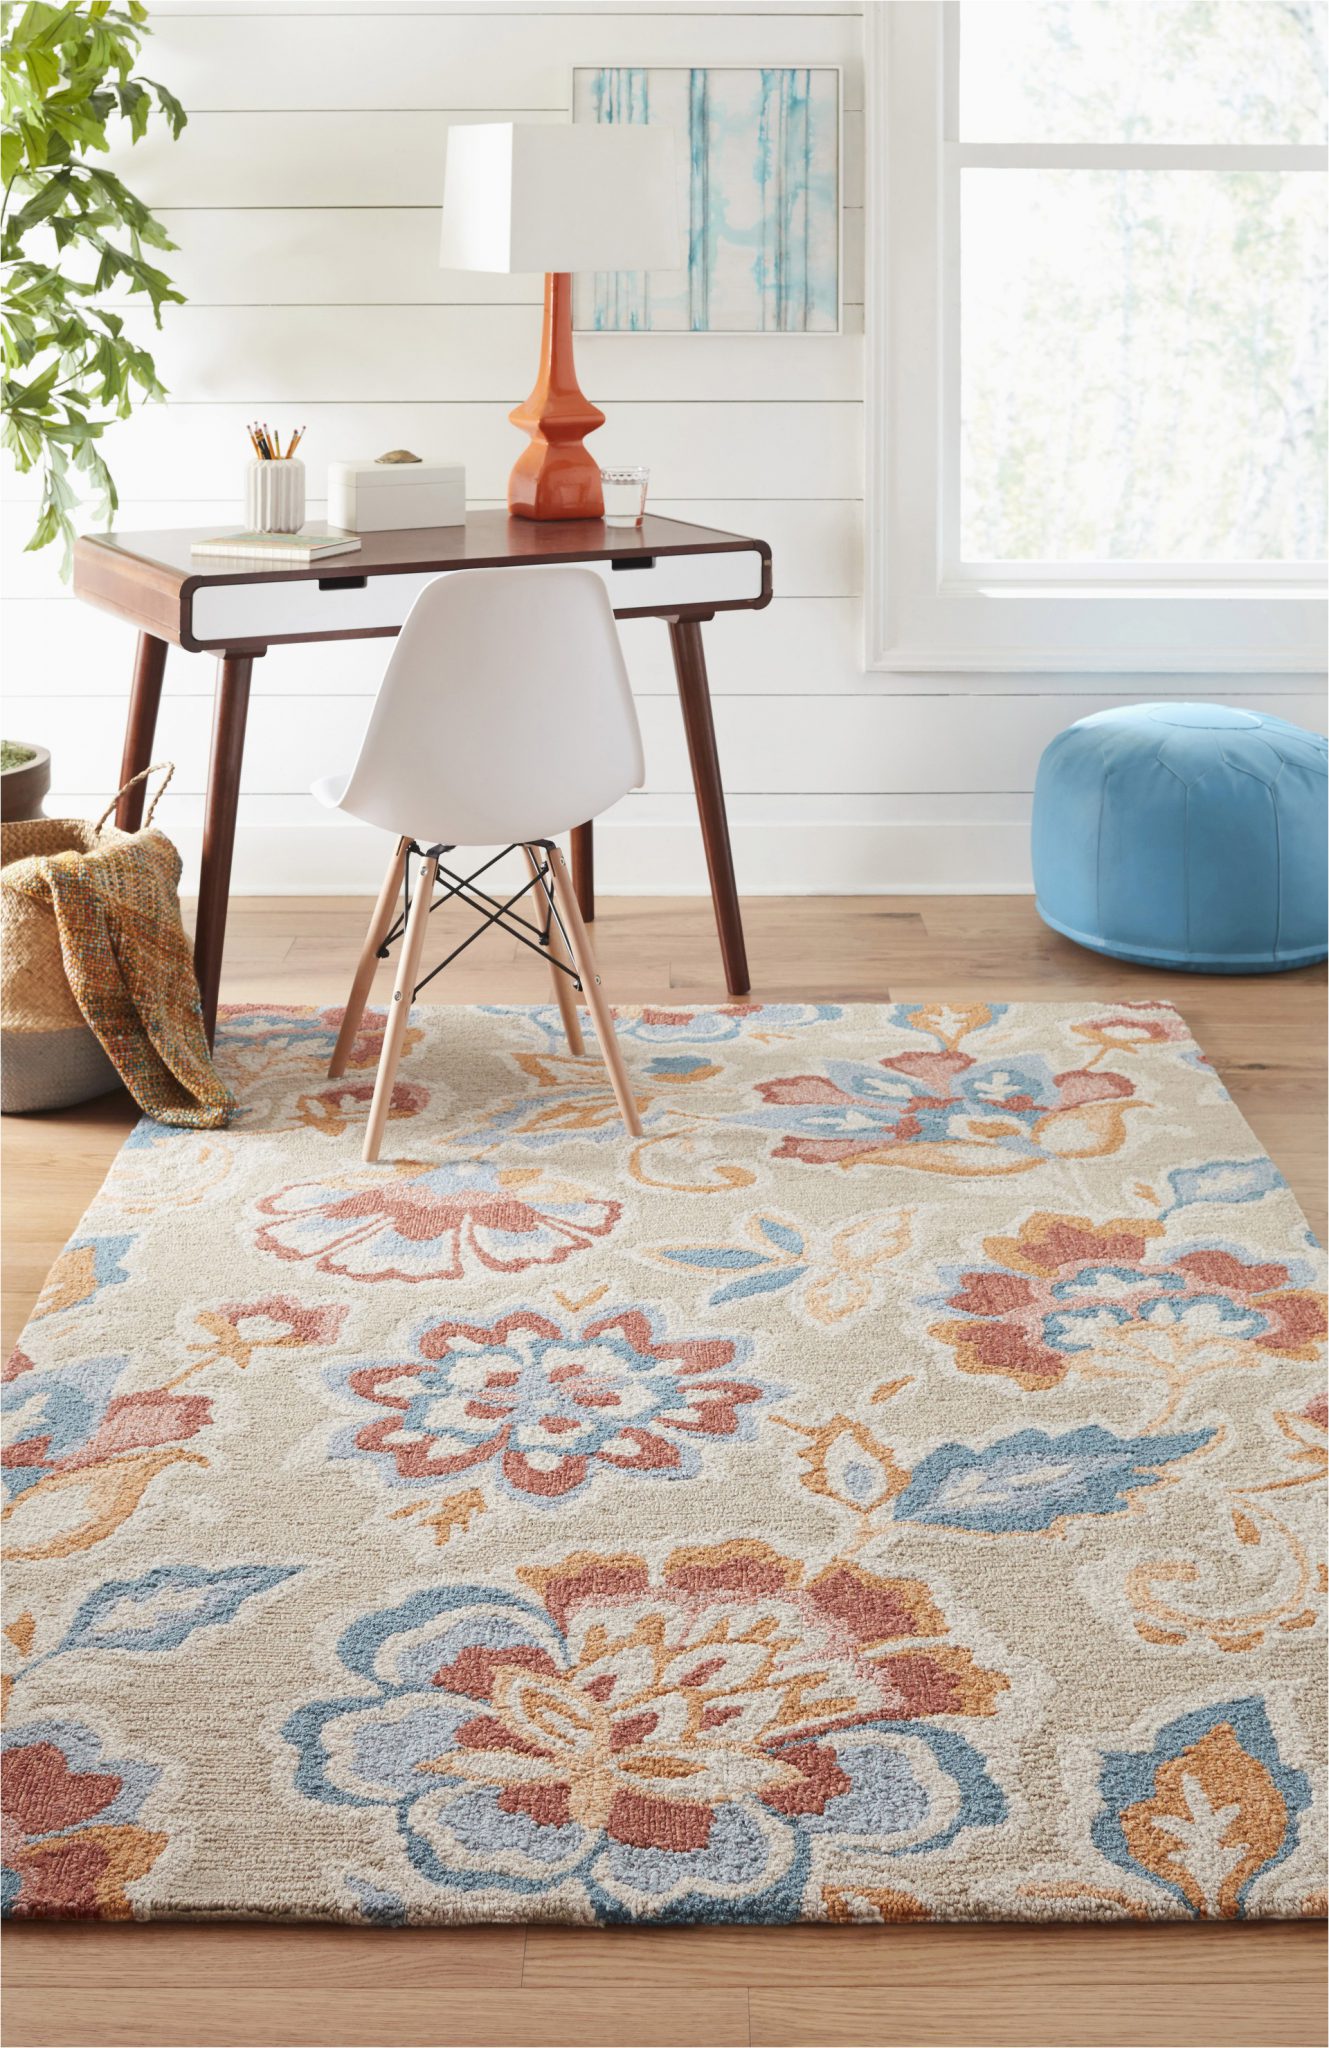 Allen Roth area Rugs at Lowes Allen Roth Milano 8 X 10 Multi Color ...